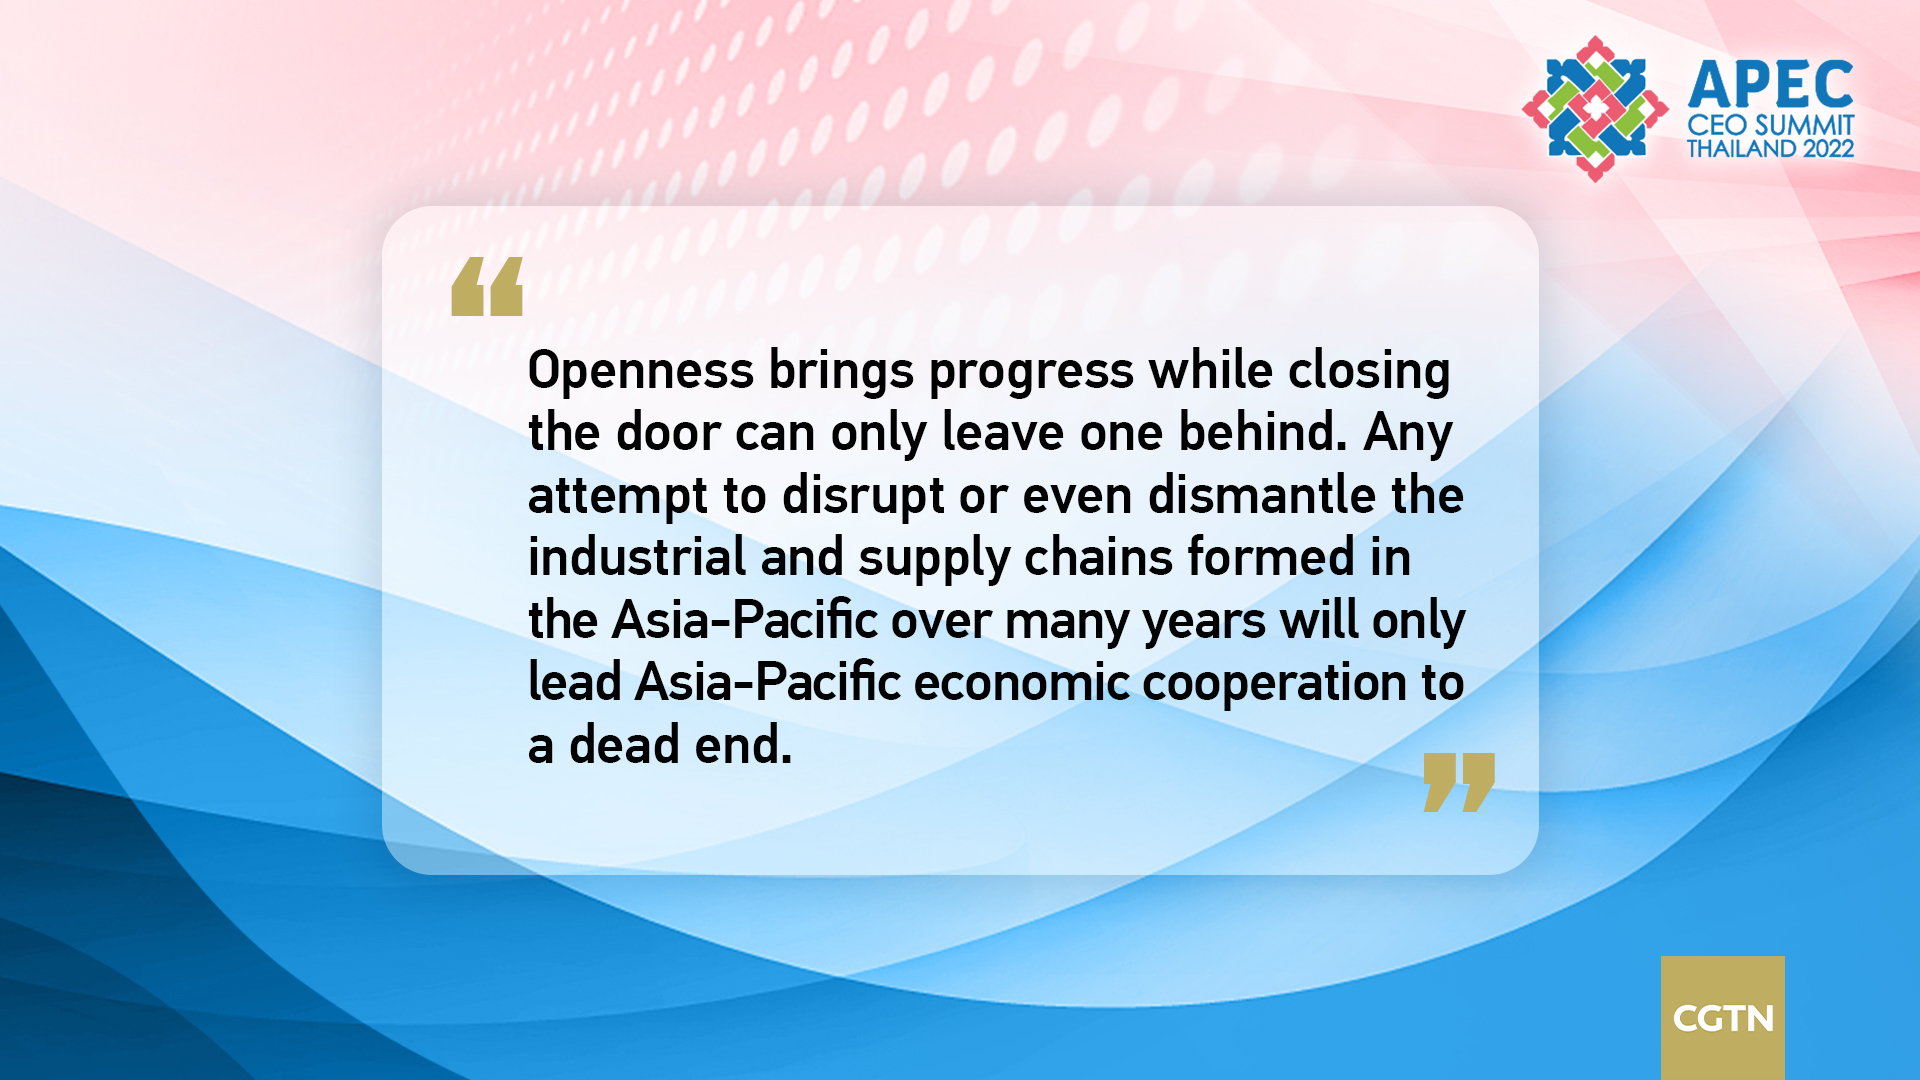 Key quotes from Xi Jinping's speech at APEC CEO Summit